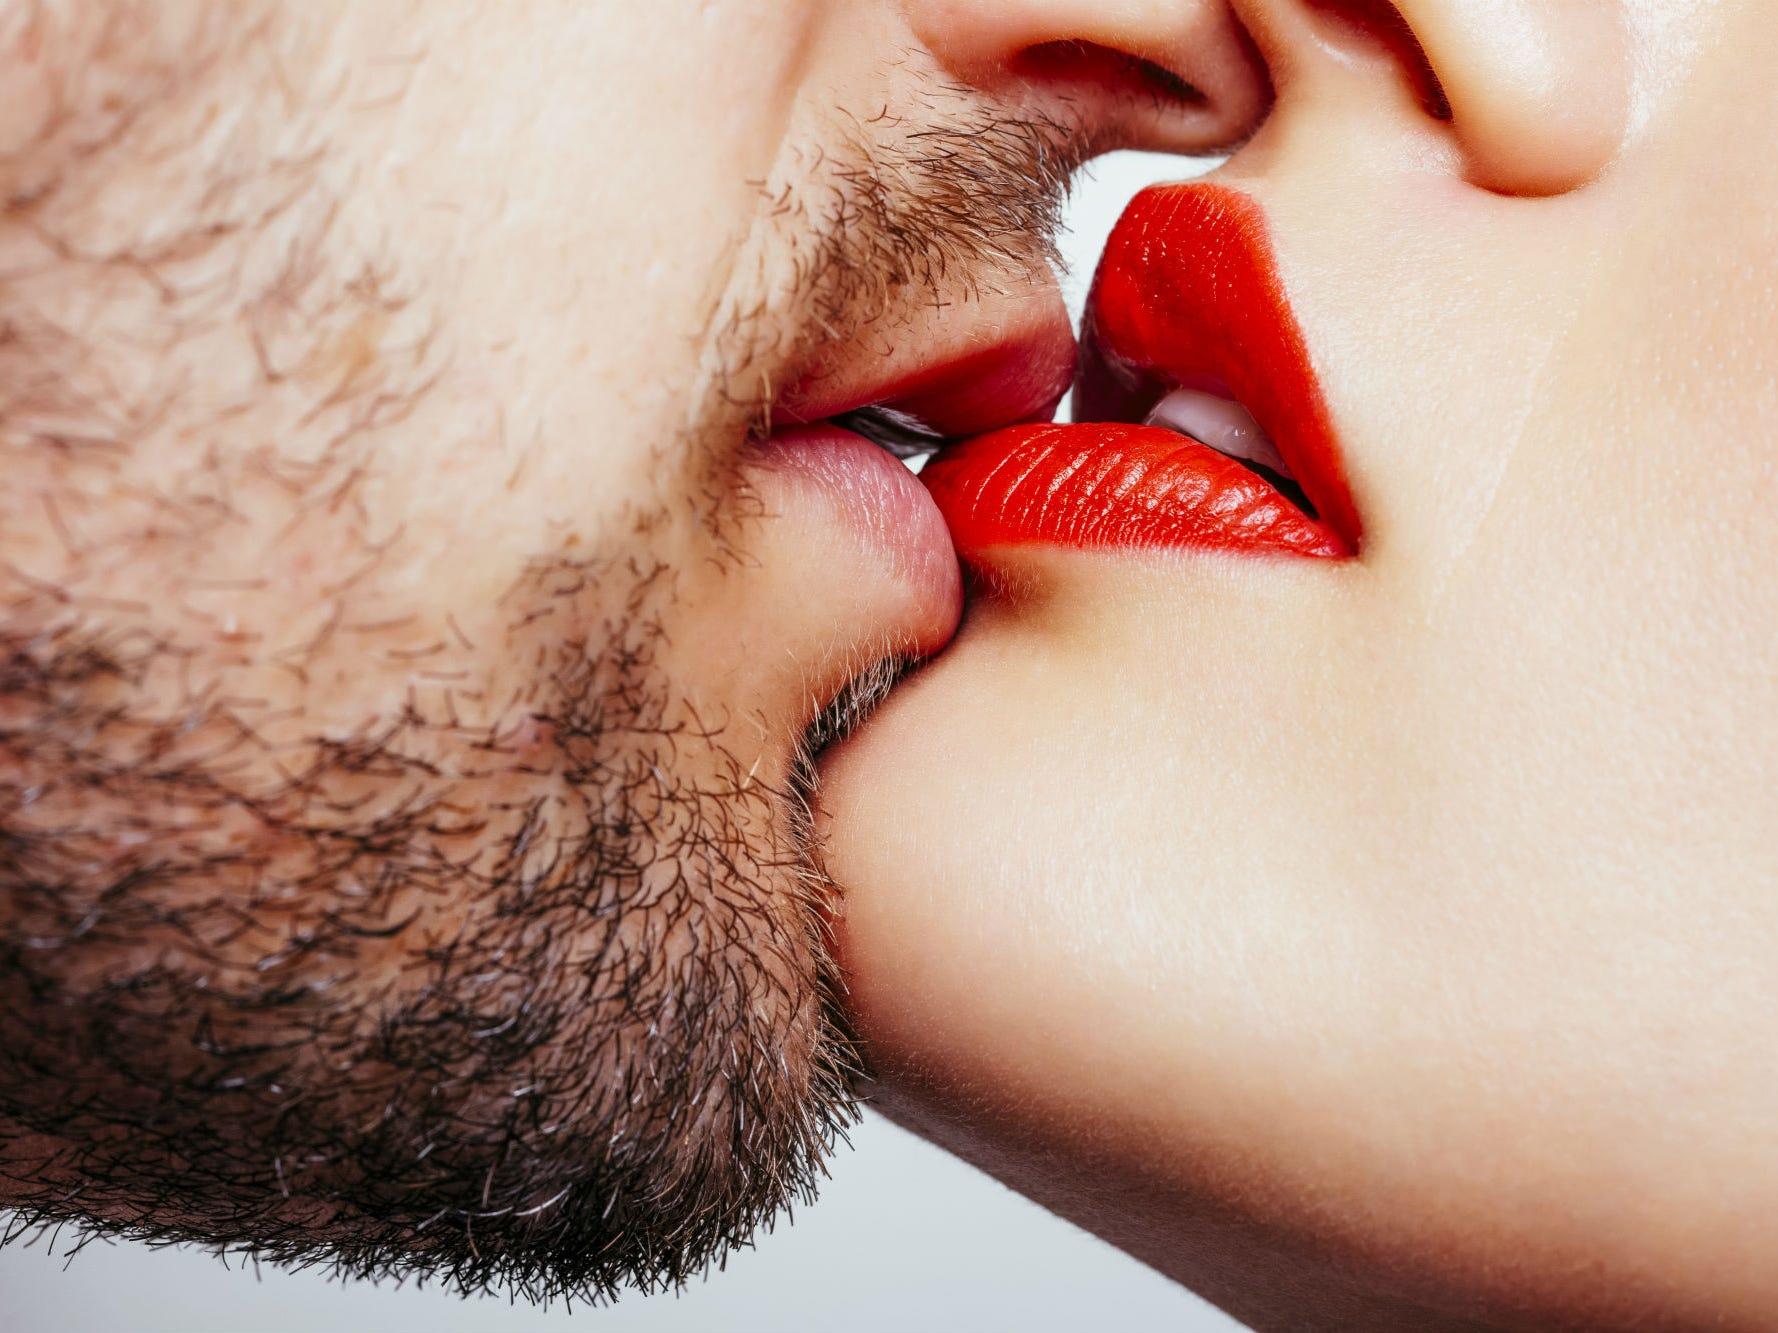 Sex affects the body and the brain.Aleksandra Kovac / ShutterstockHumans sp...